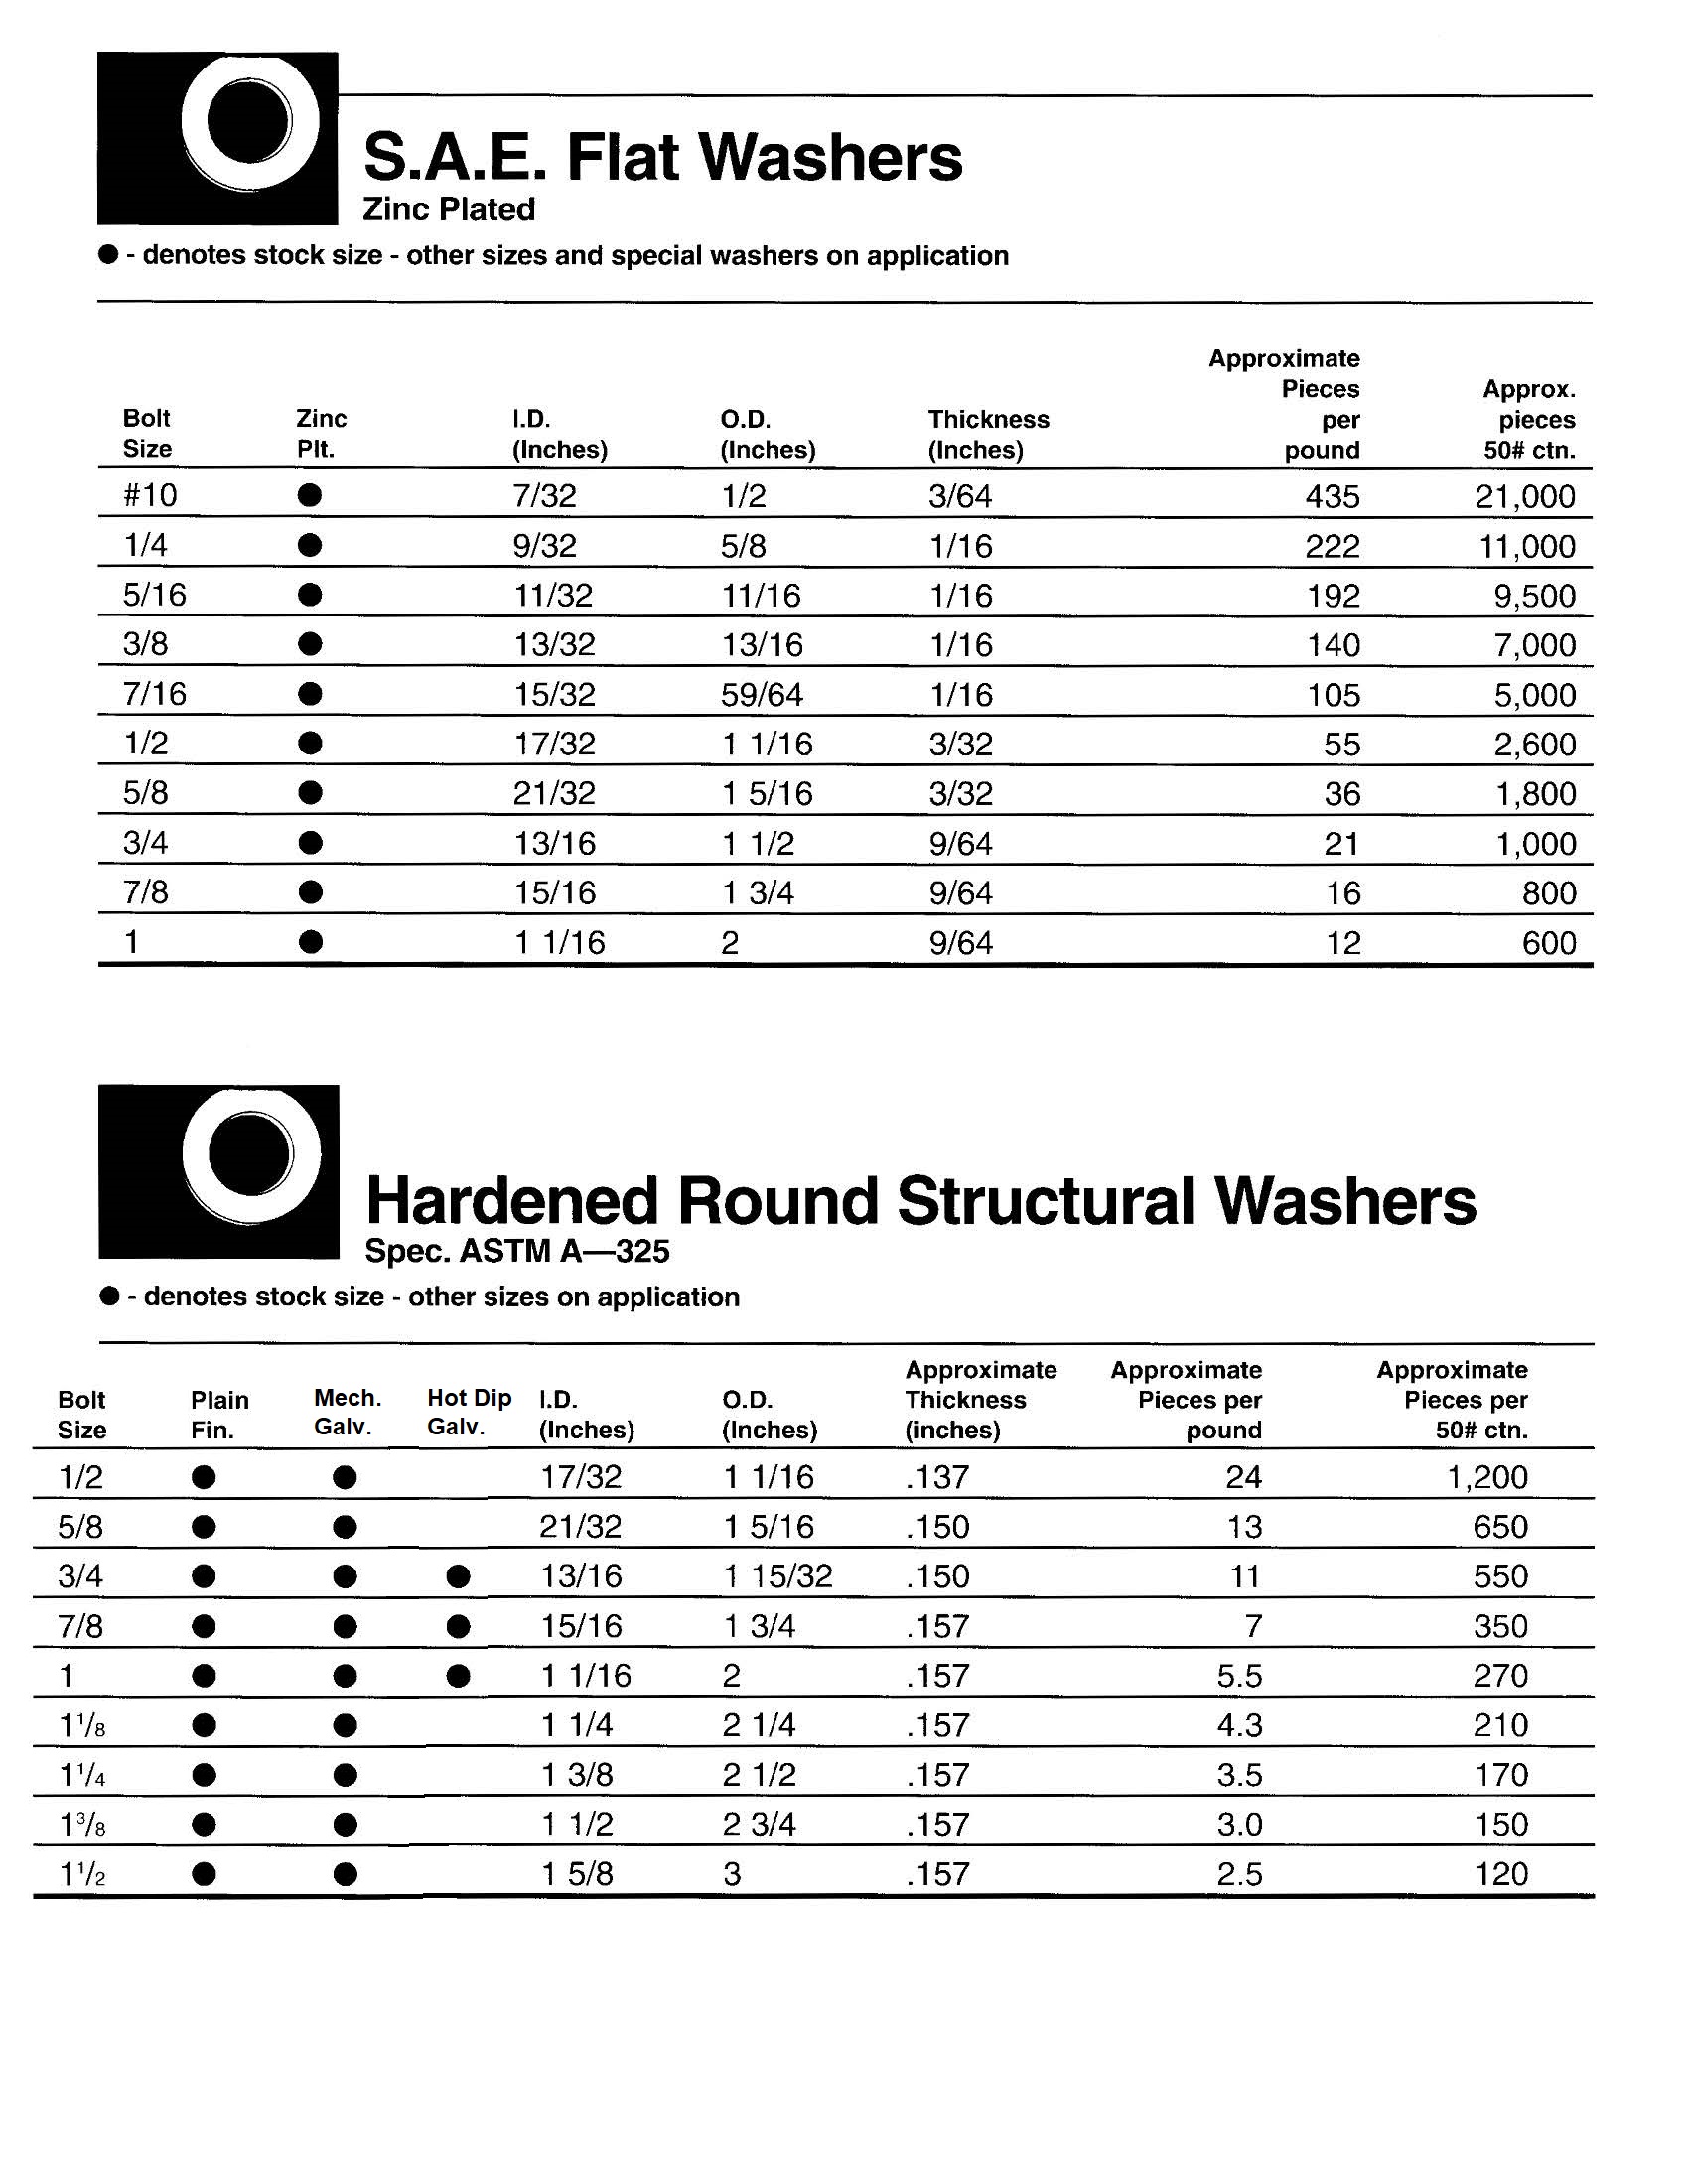 S.A.E AND STRUCTURAL WASHER DIMENSIONS